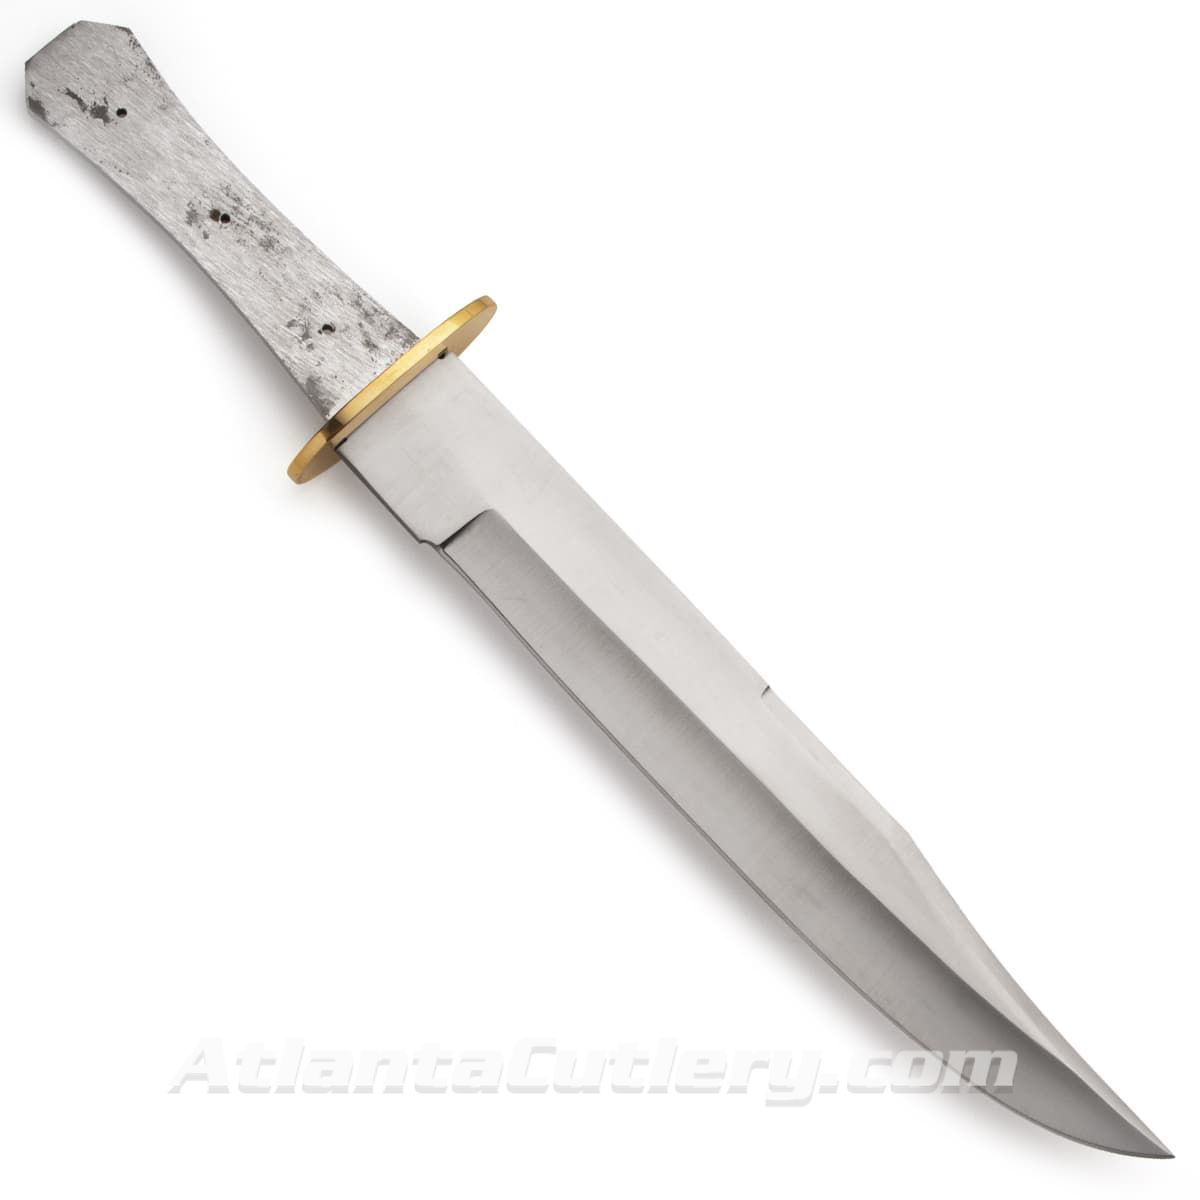 400 series stainless steel coffin handle clip point Bowie blade has polished solid brass guard, pre-drilled full tang, sharp edge